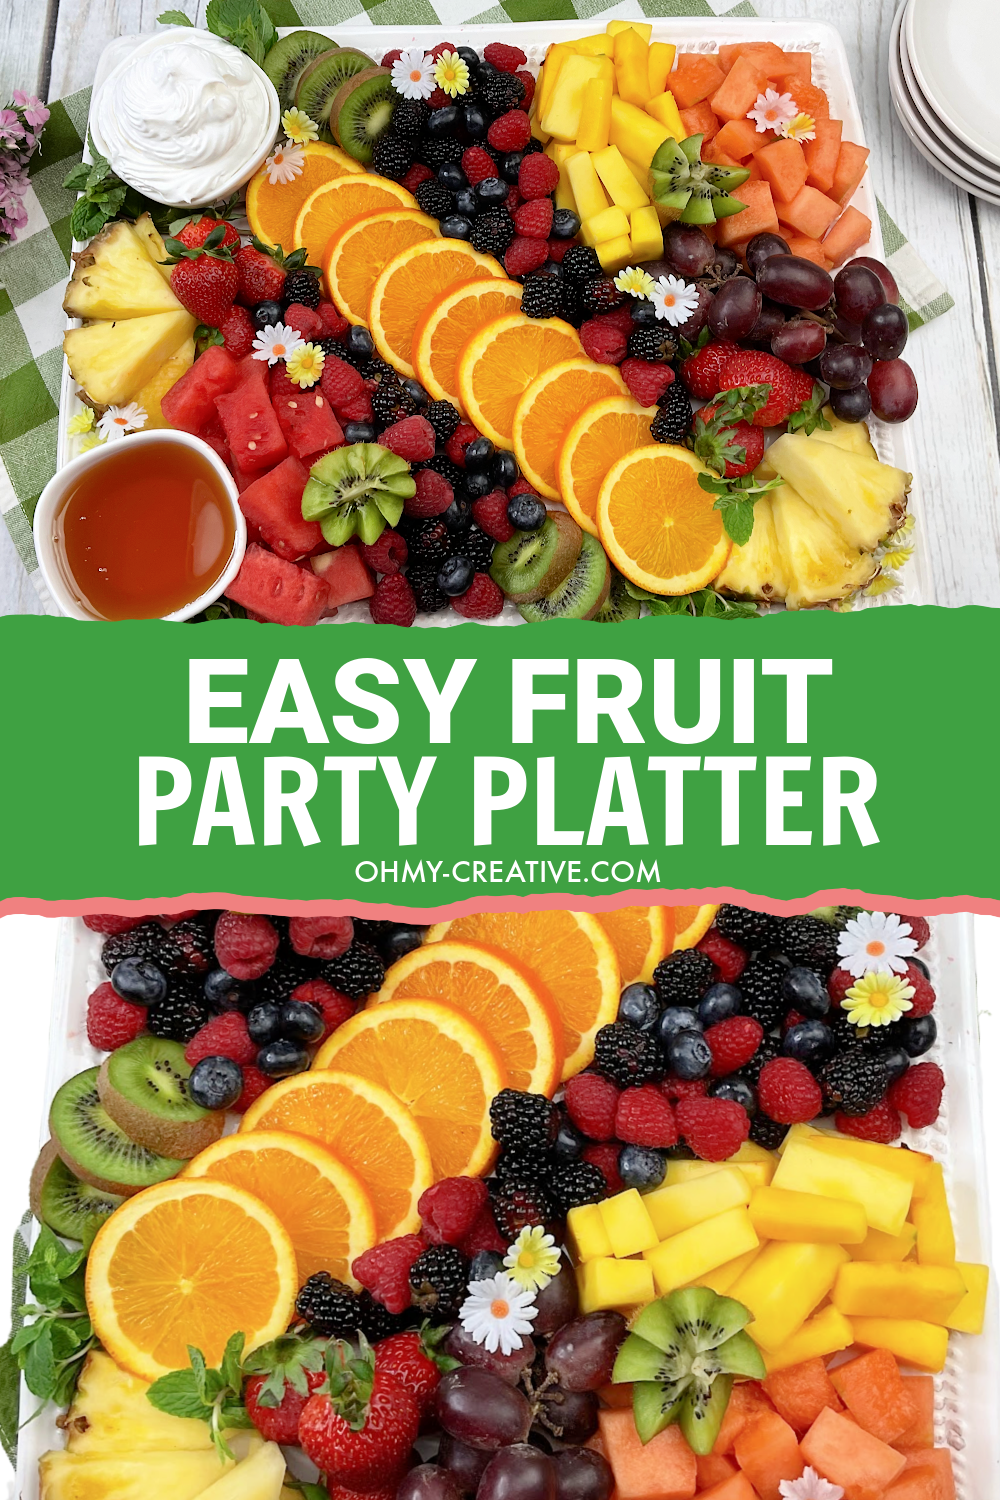 Easy Fruit Party Platter with oranges, berries, kiwi, pineapple and more.